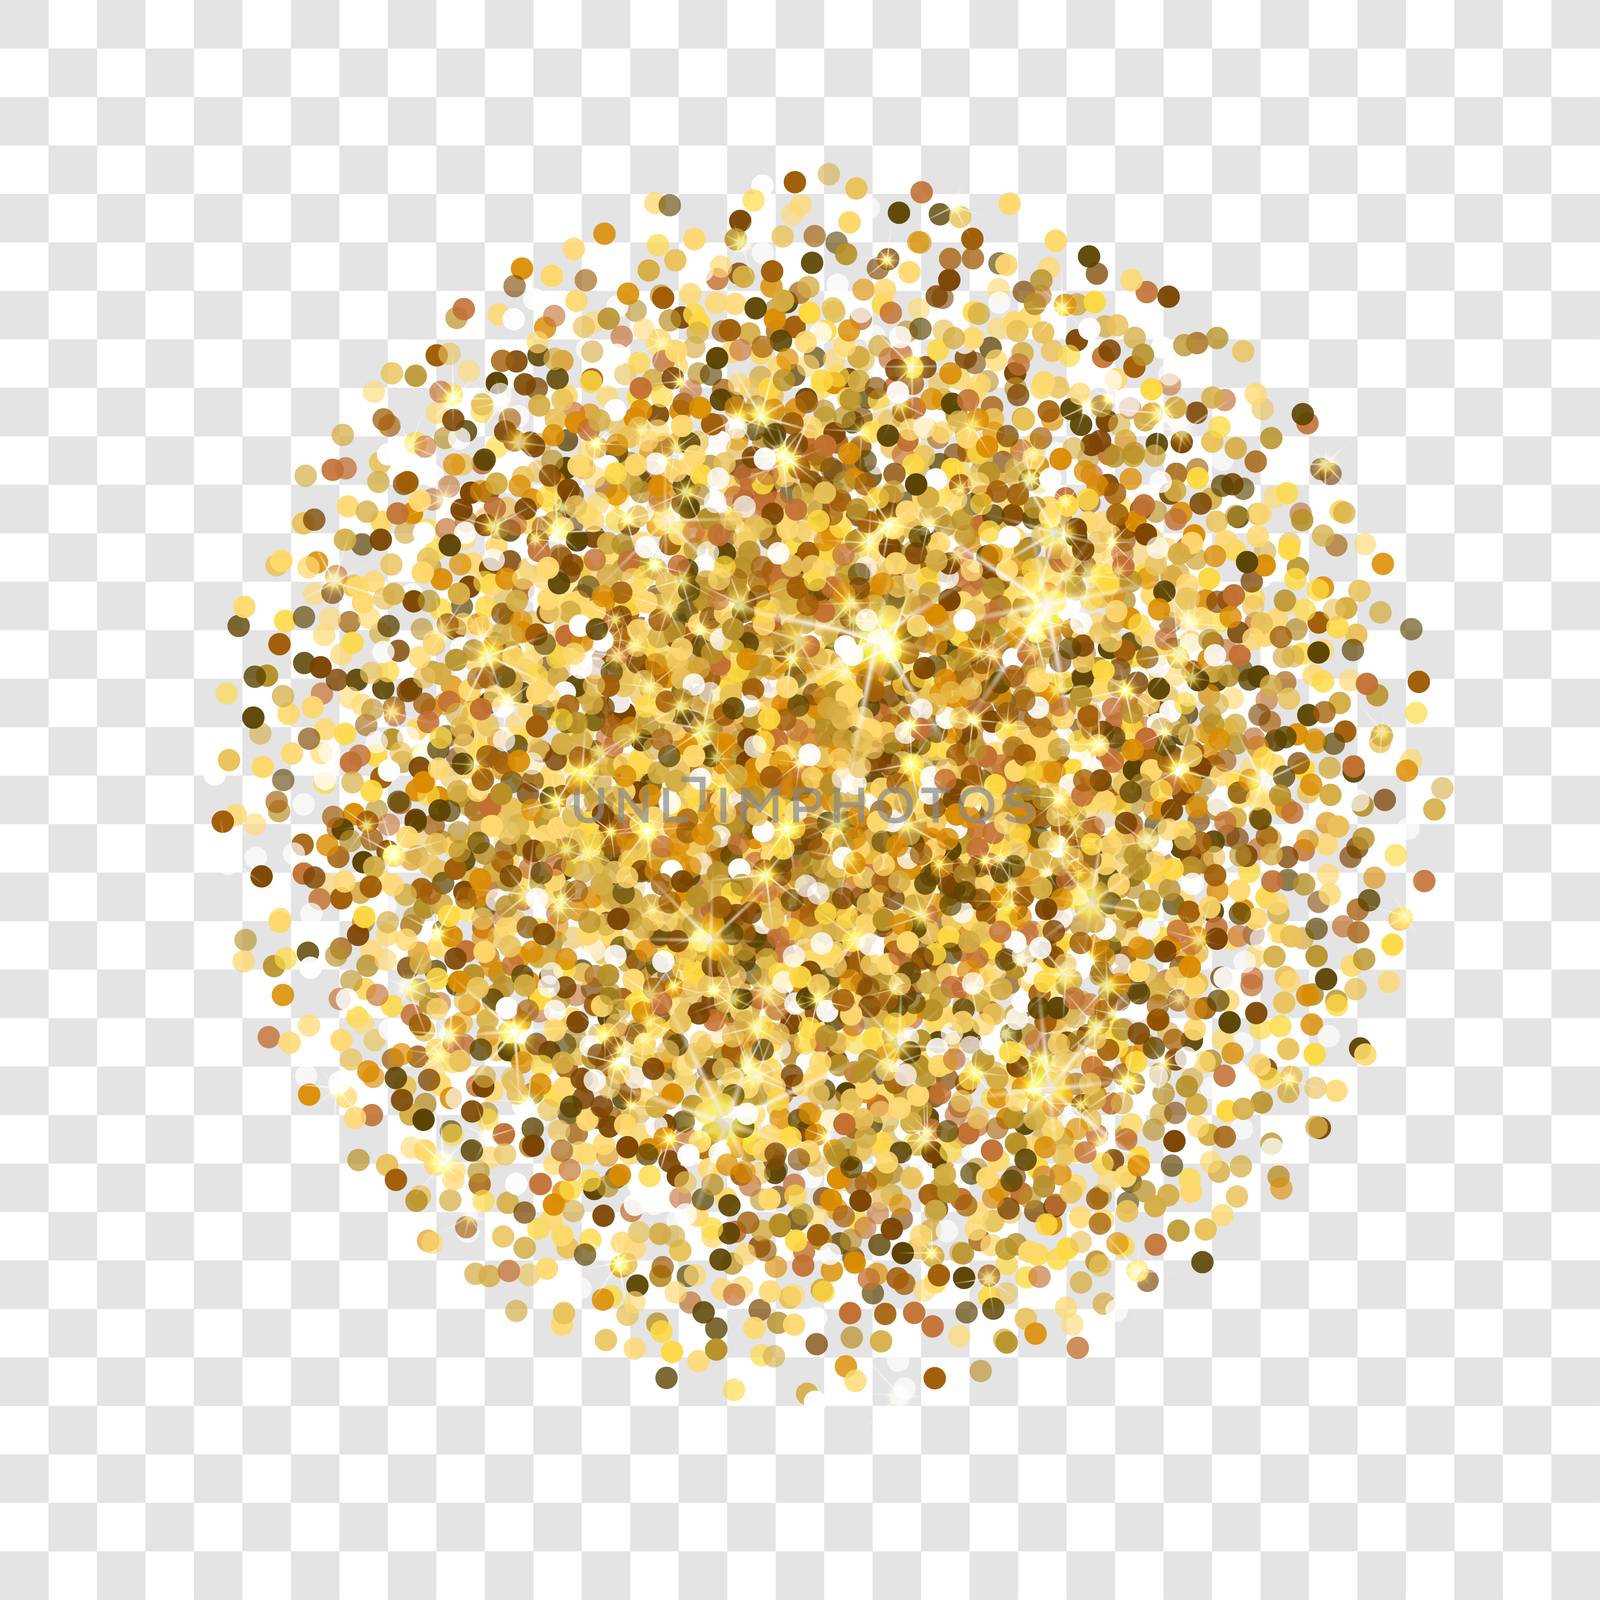 Golden glittering circle made of dots. Luxury golden round dots on transparent backdrop. Amber particles gold confetti.